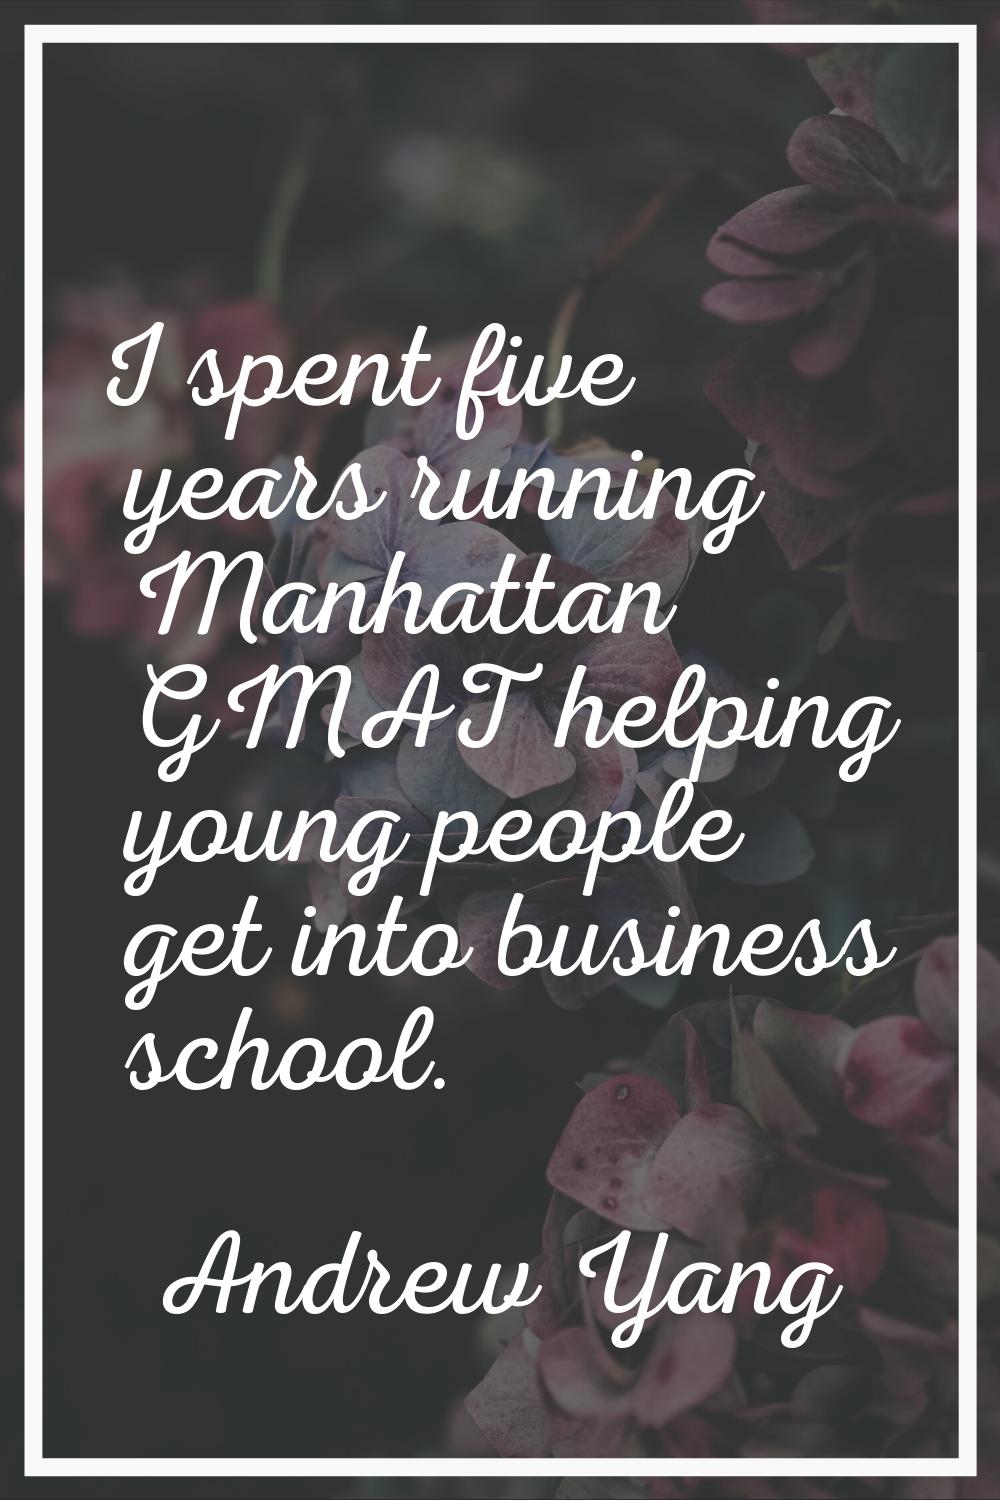 I spent five years running Manhattan GMAT helping young people get into business school.